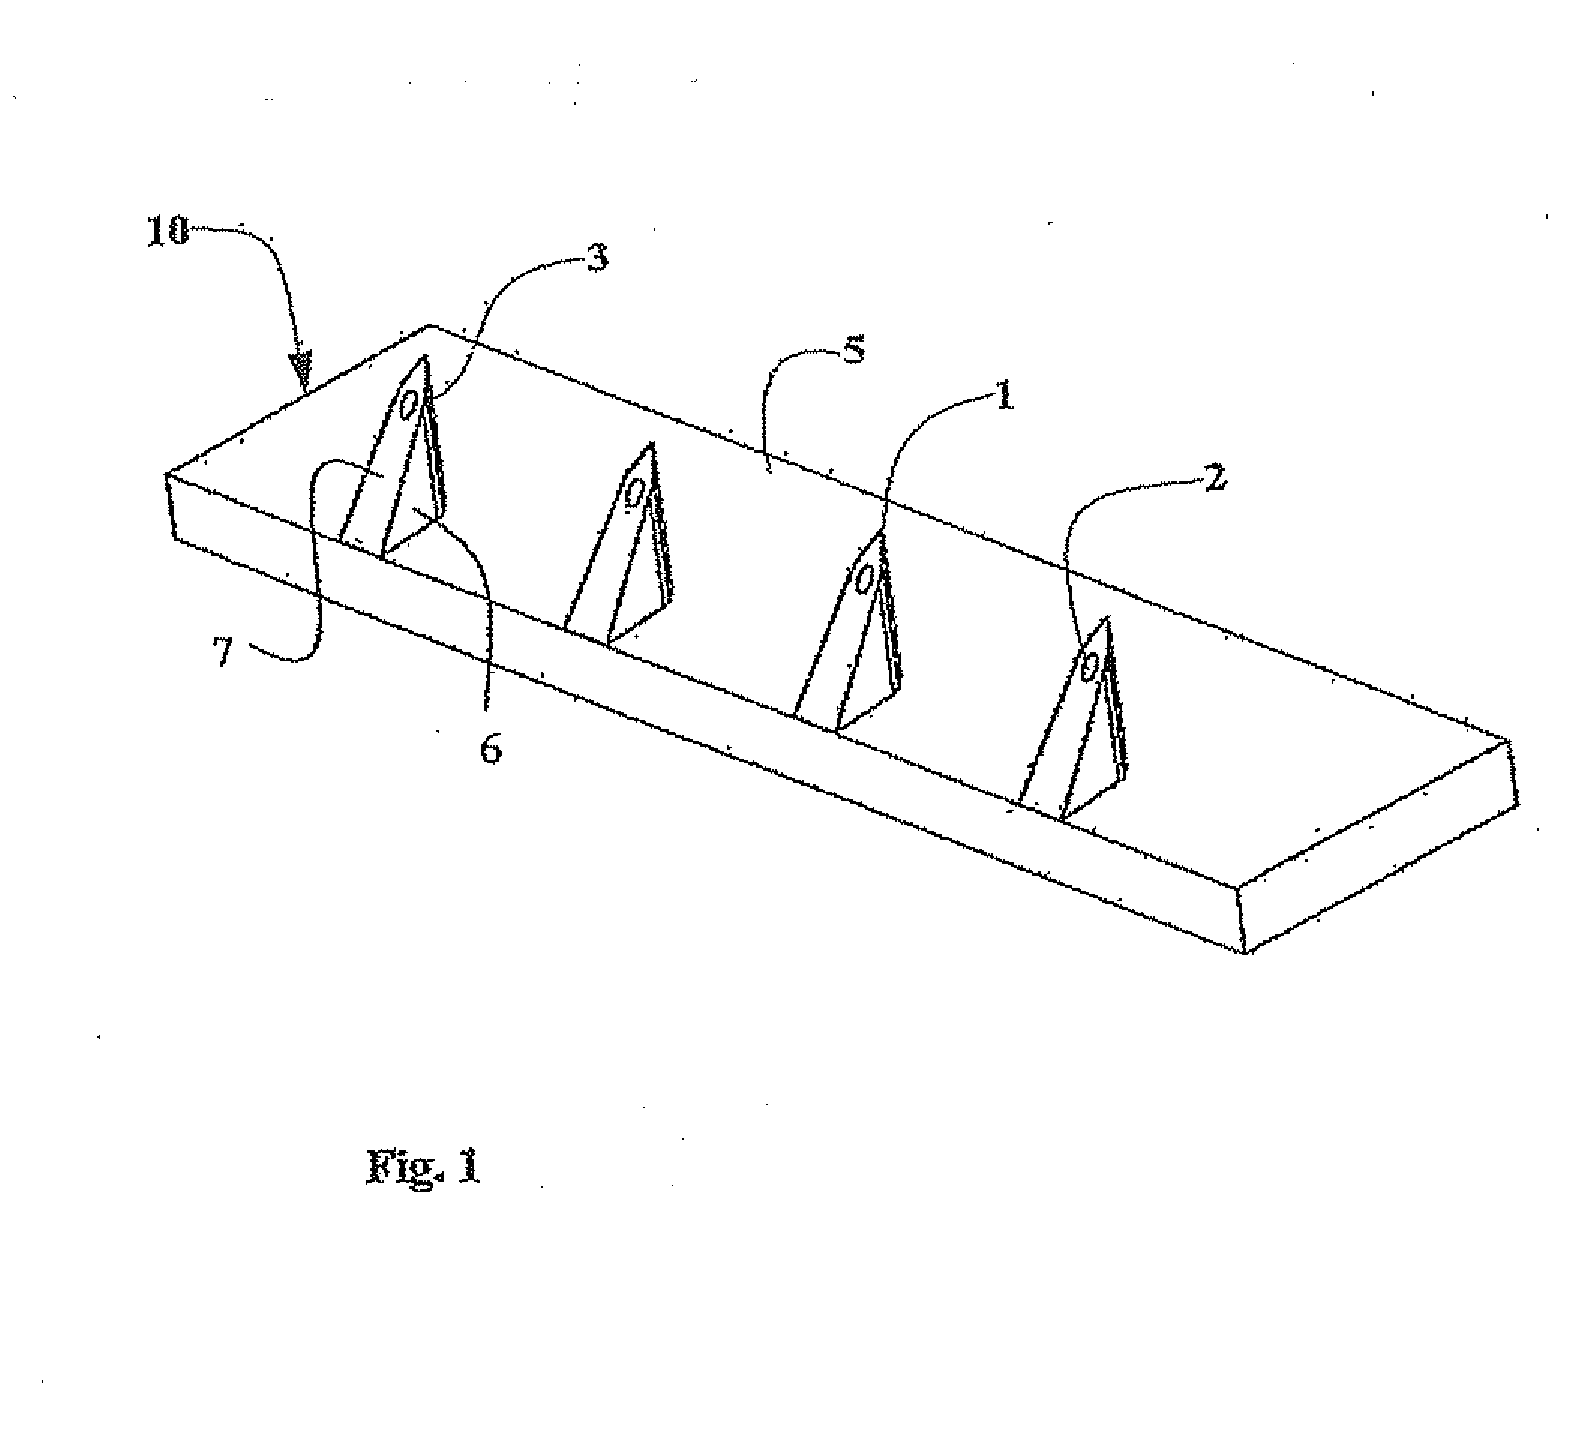 Microneedle adapter for dosed drug delivery devices